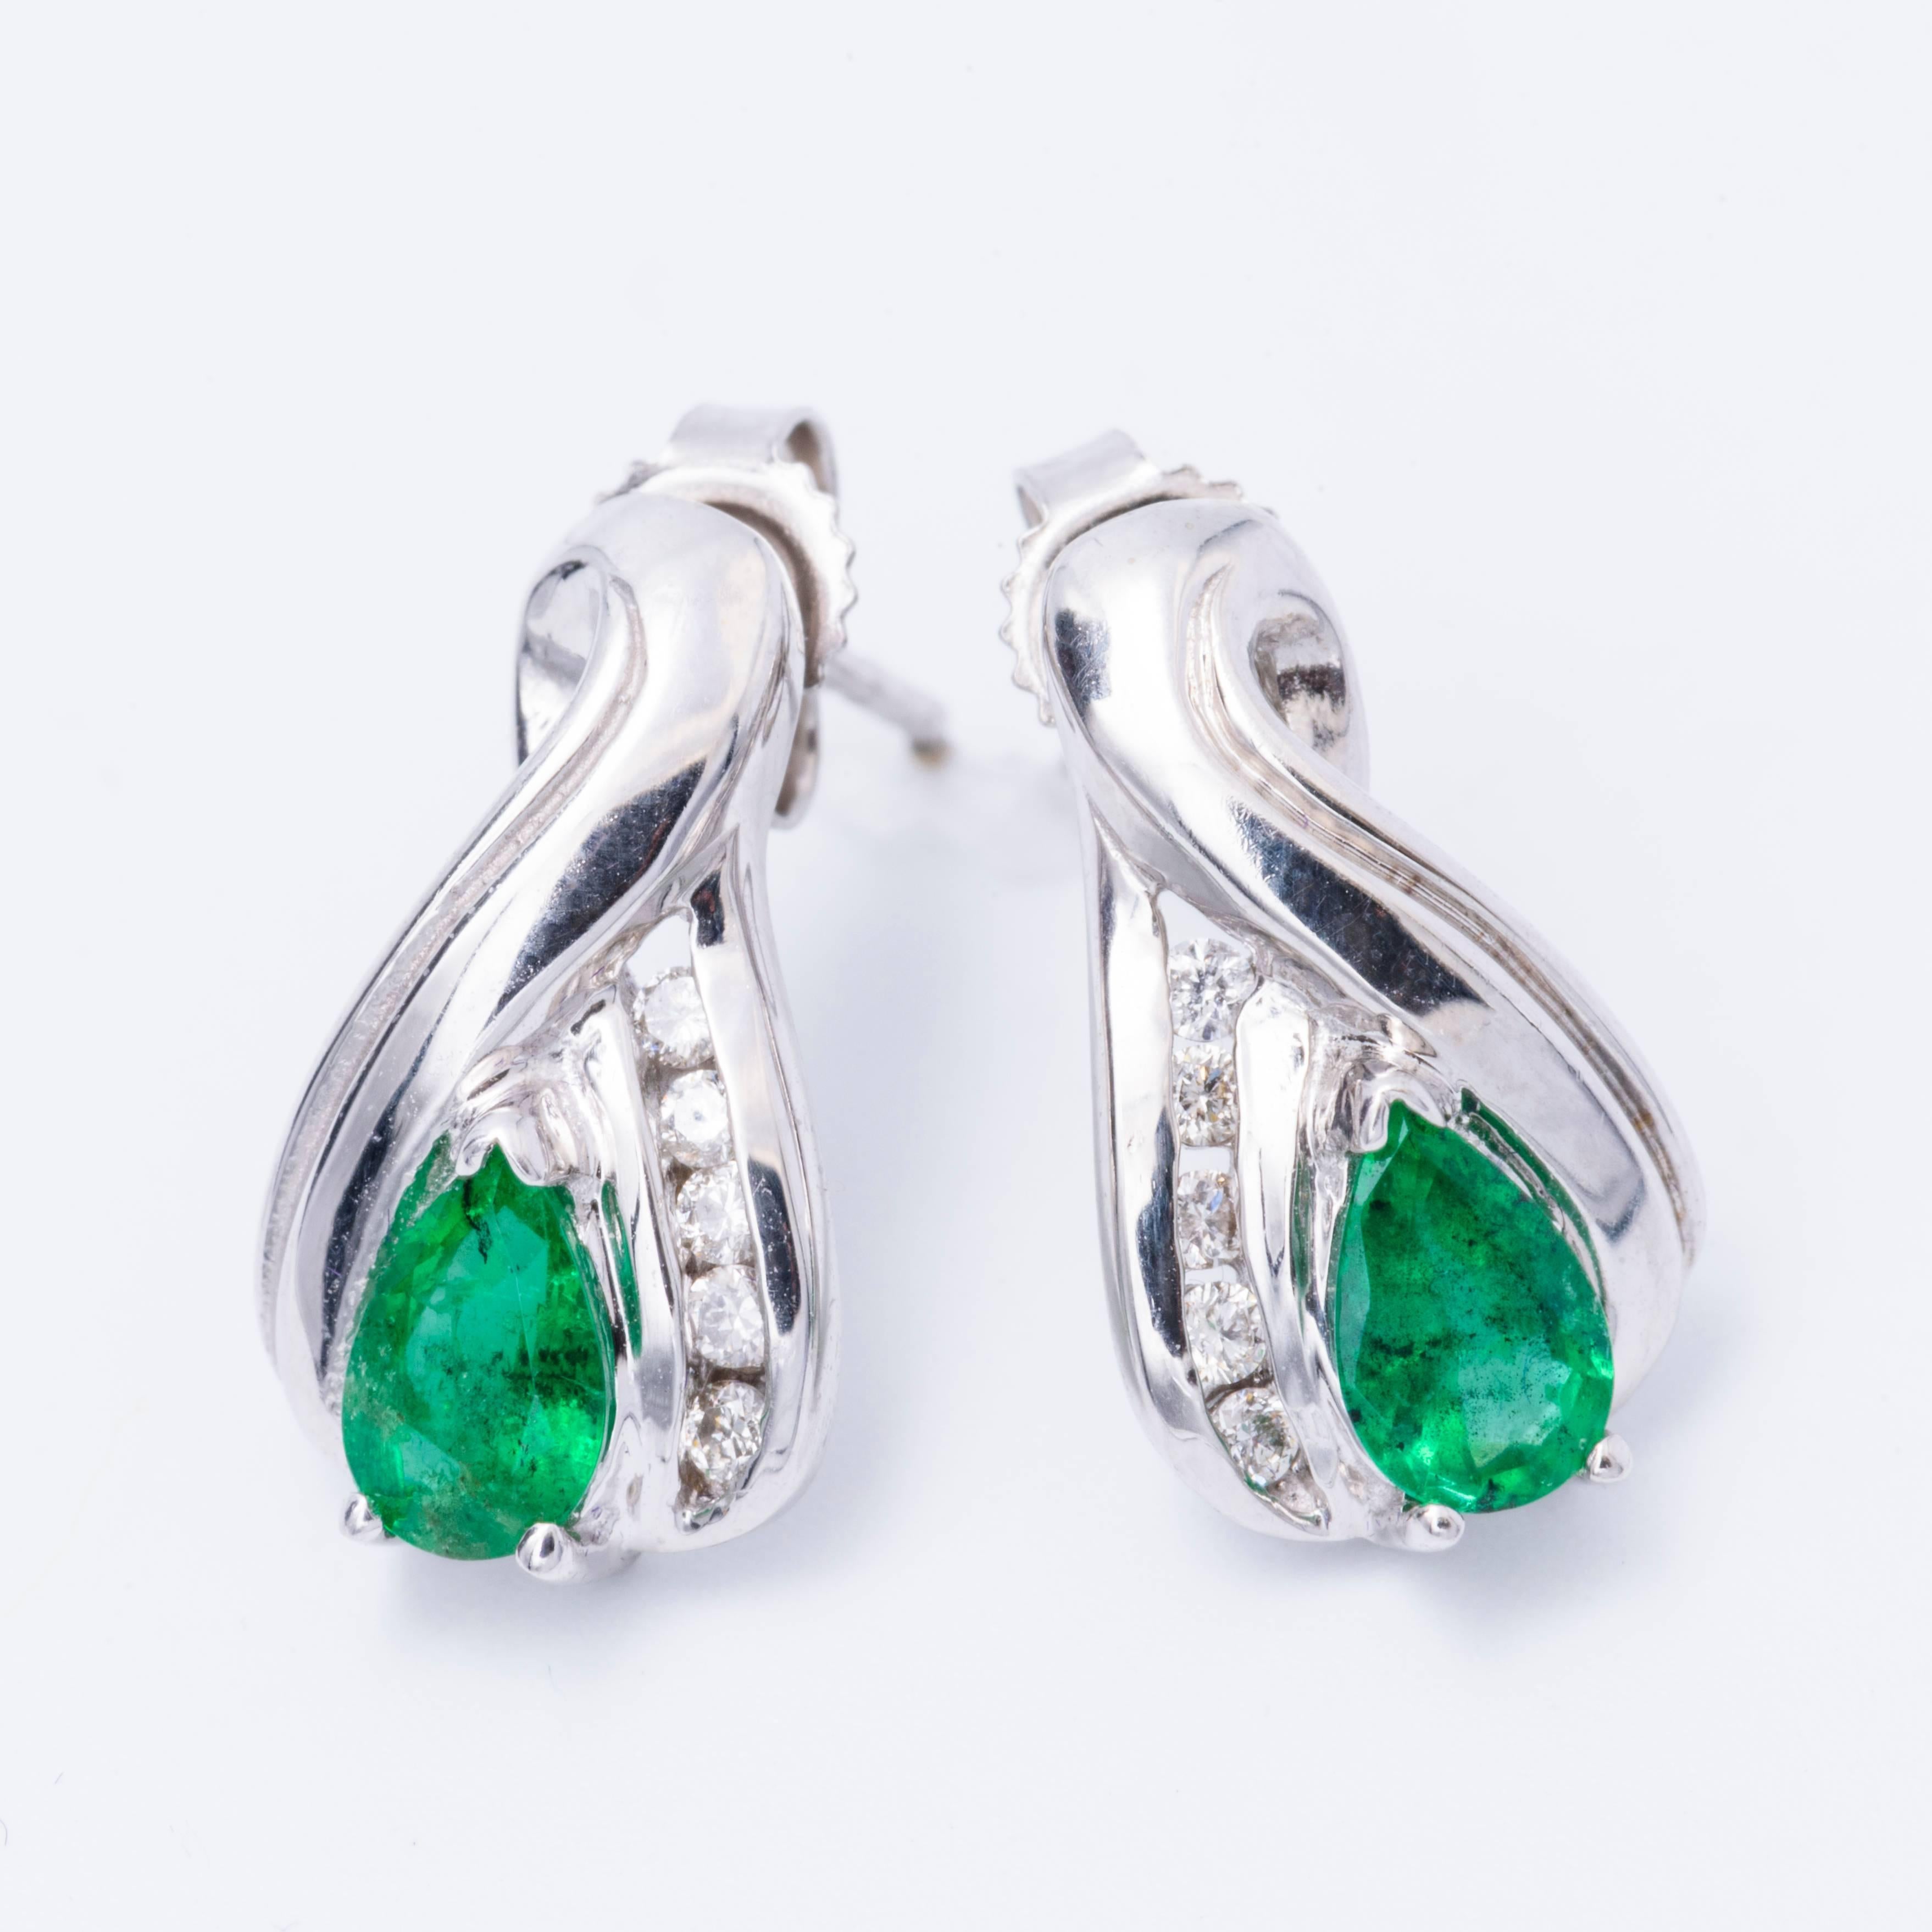 14 K White Gold 
Pear Shape Emerald 0.68 Carats total weight each measuring 5 x 3 mm
1.5 x 8 mm Earrings Dimensions
Diamond total weight 0.12 Cts.